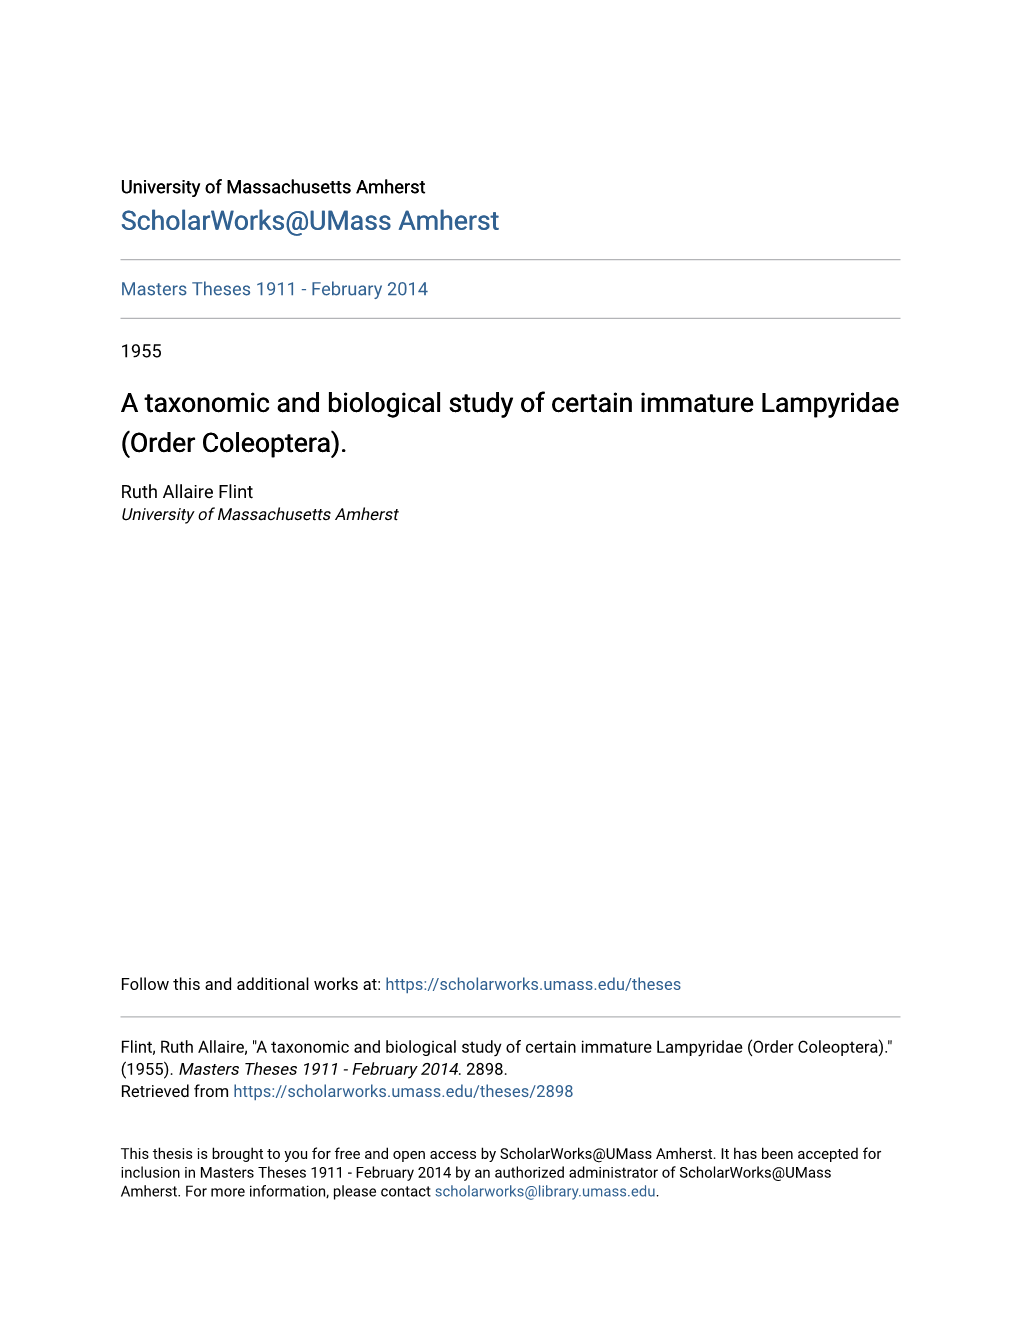 A Taxonomic and Biological Study of Certain Immature Lampyridae (Order Coleoptera)